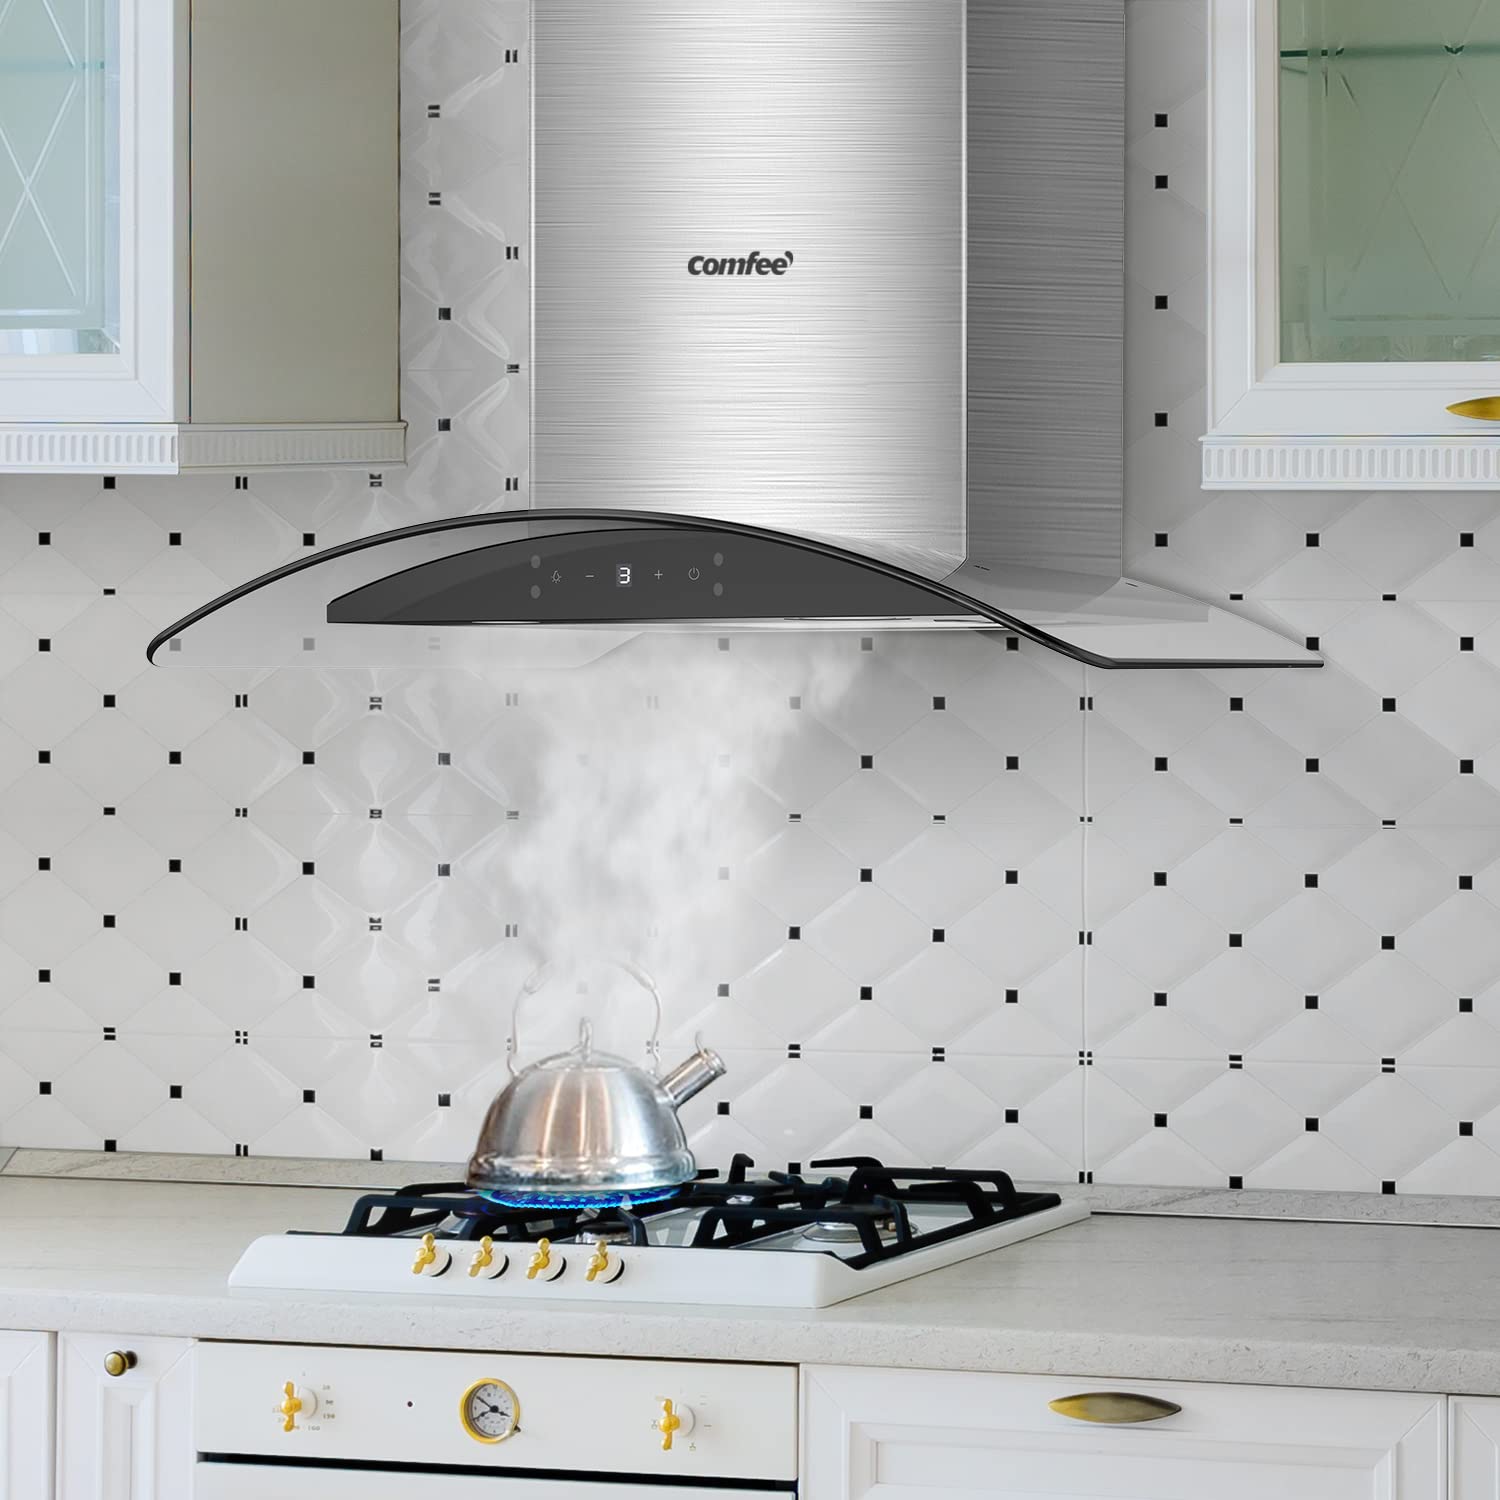 wall mount ducted range hood sucking smoke from a kettle on a oven